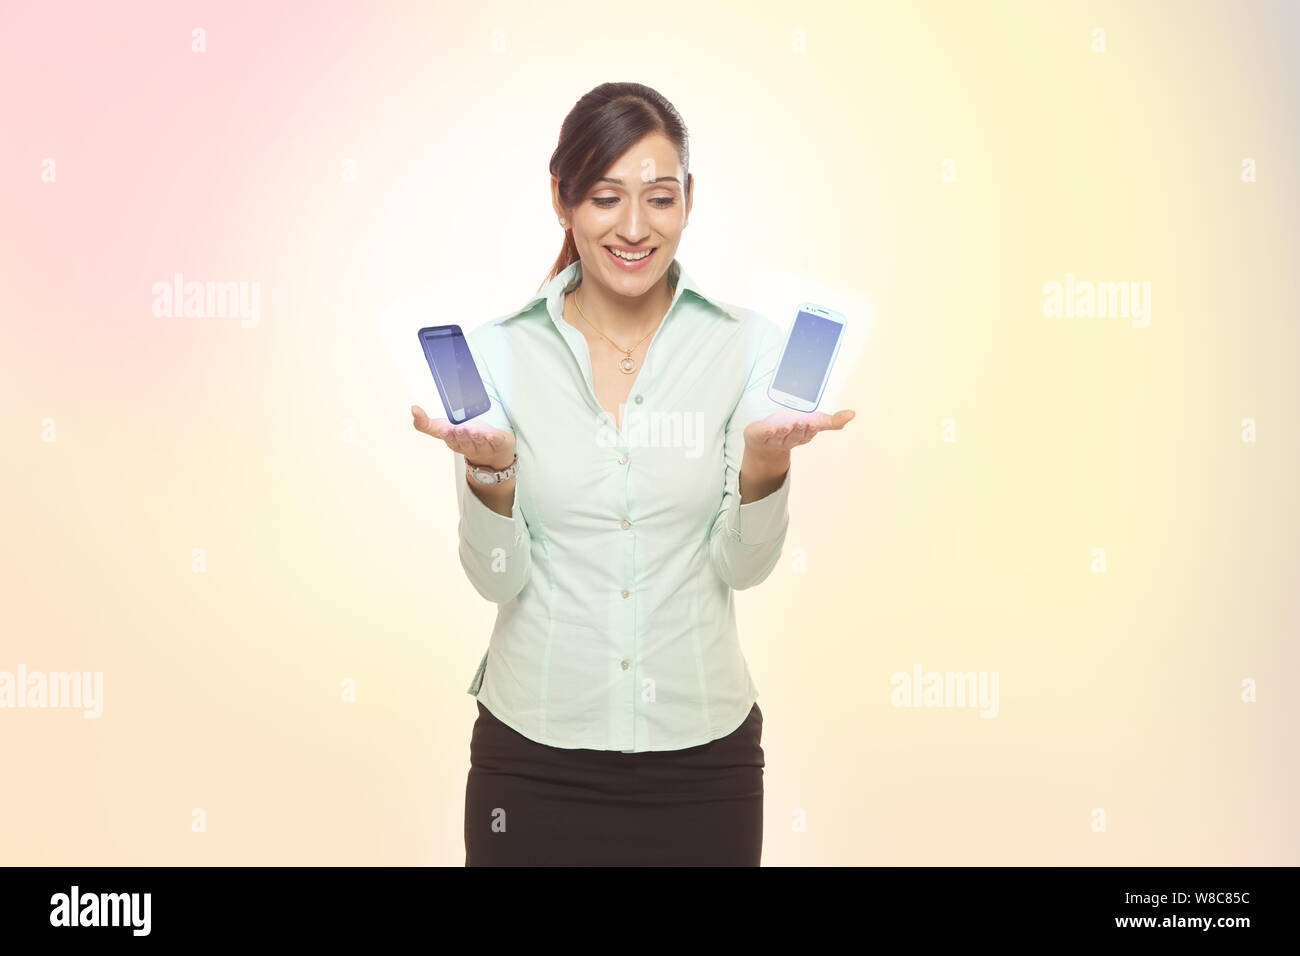 Businesswoman comparing two smart phones Stock Photo